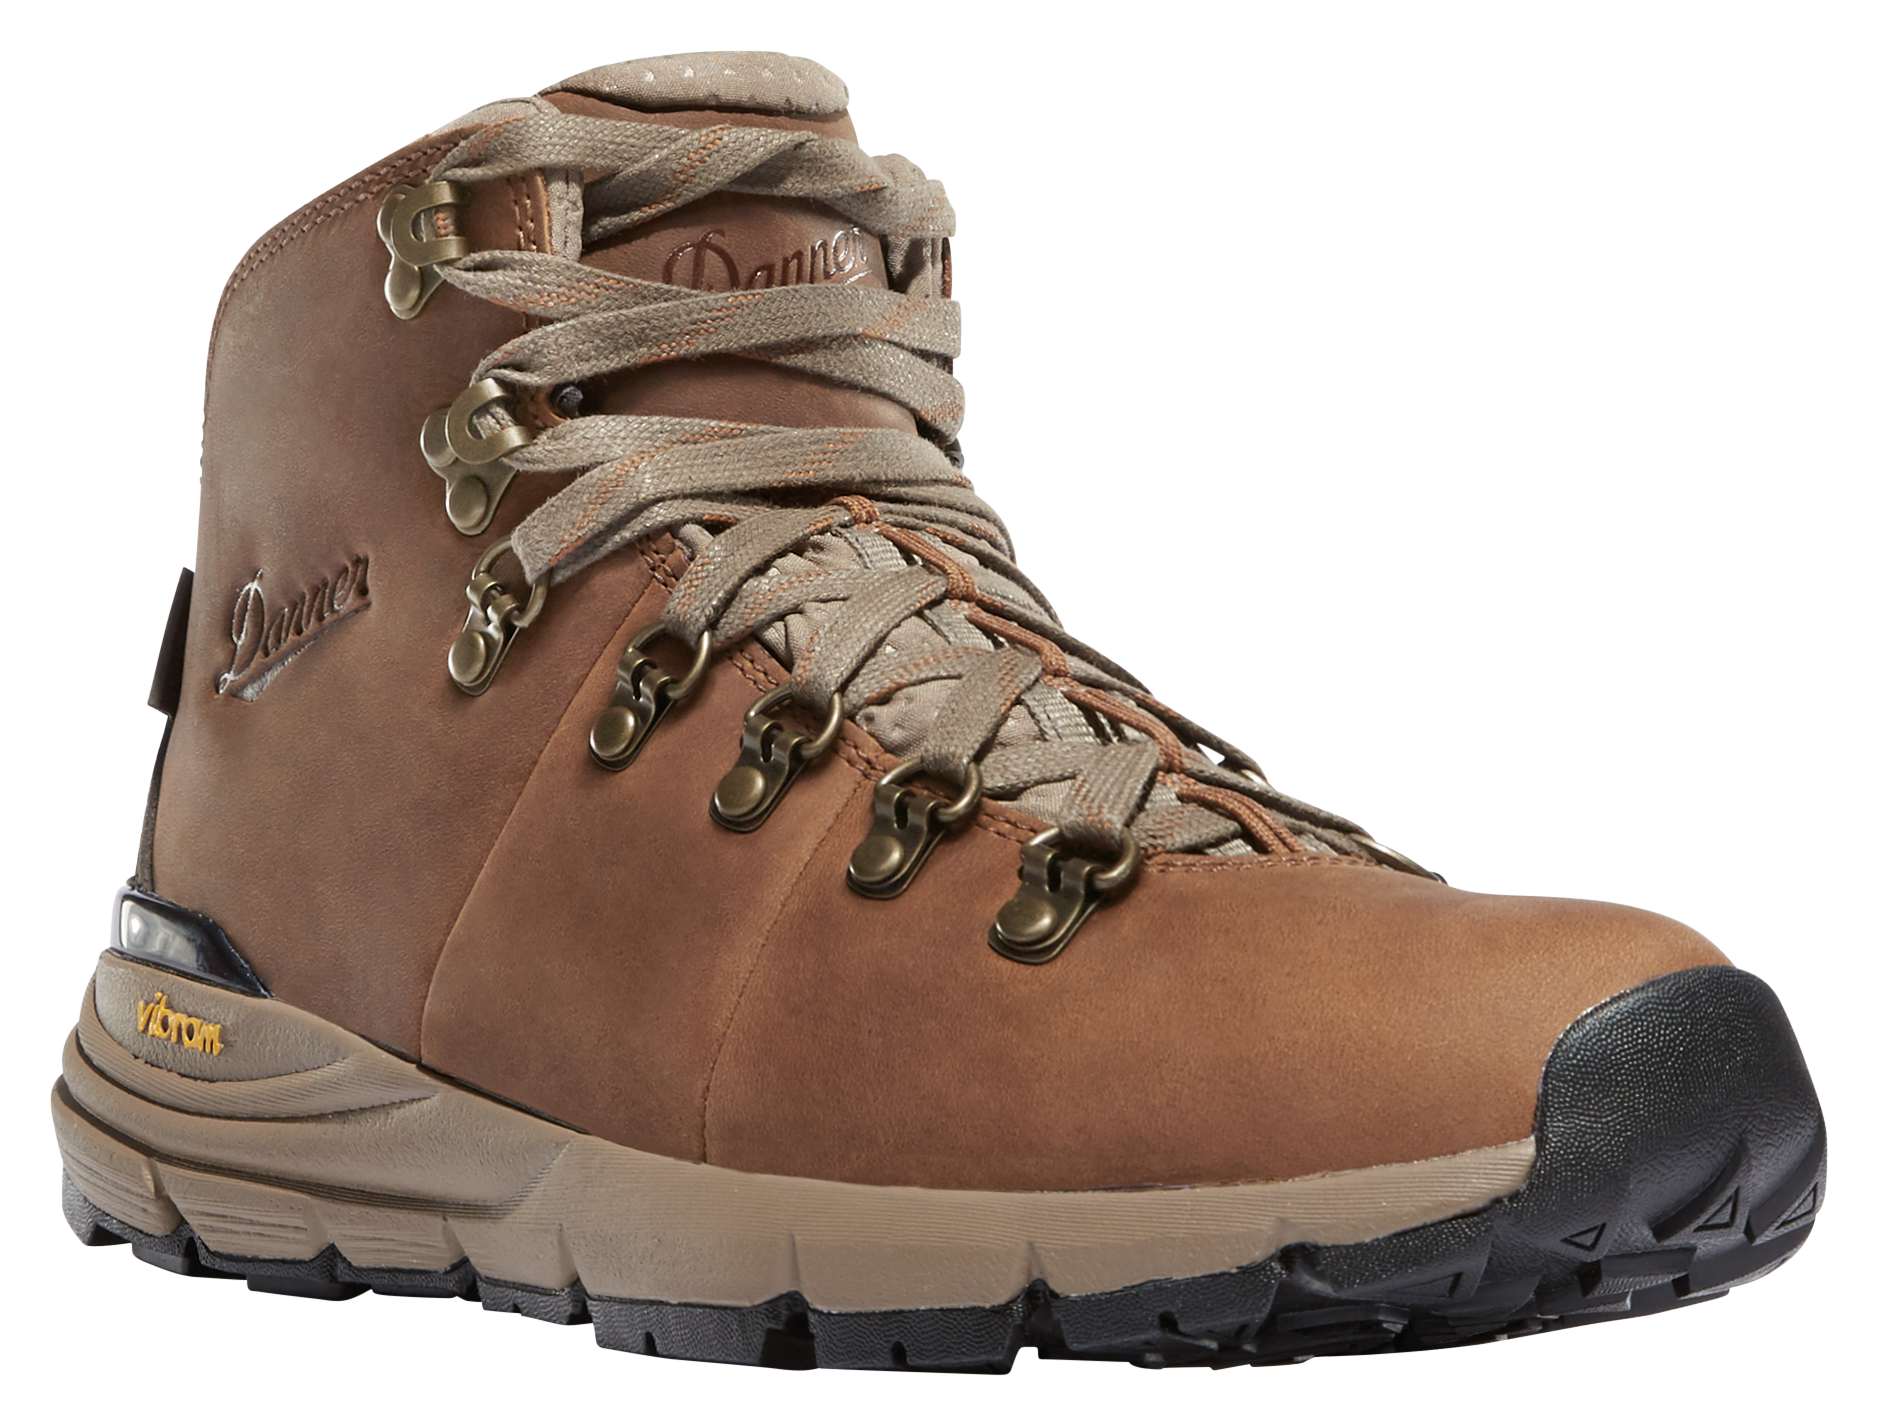 Danner Mountain 600 Leather Waterproof Hiking Boots for Ladies - Rich Brown - 7.5M